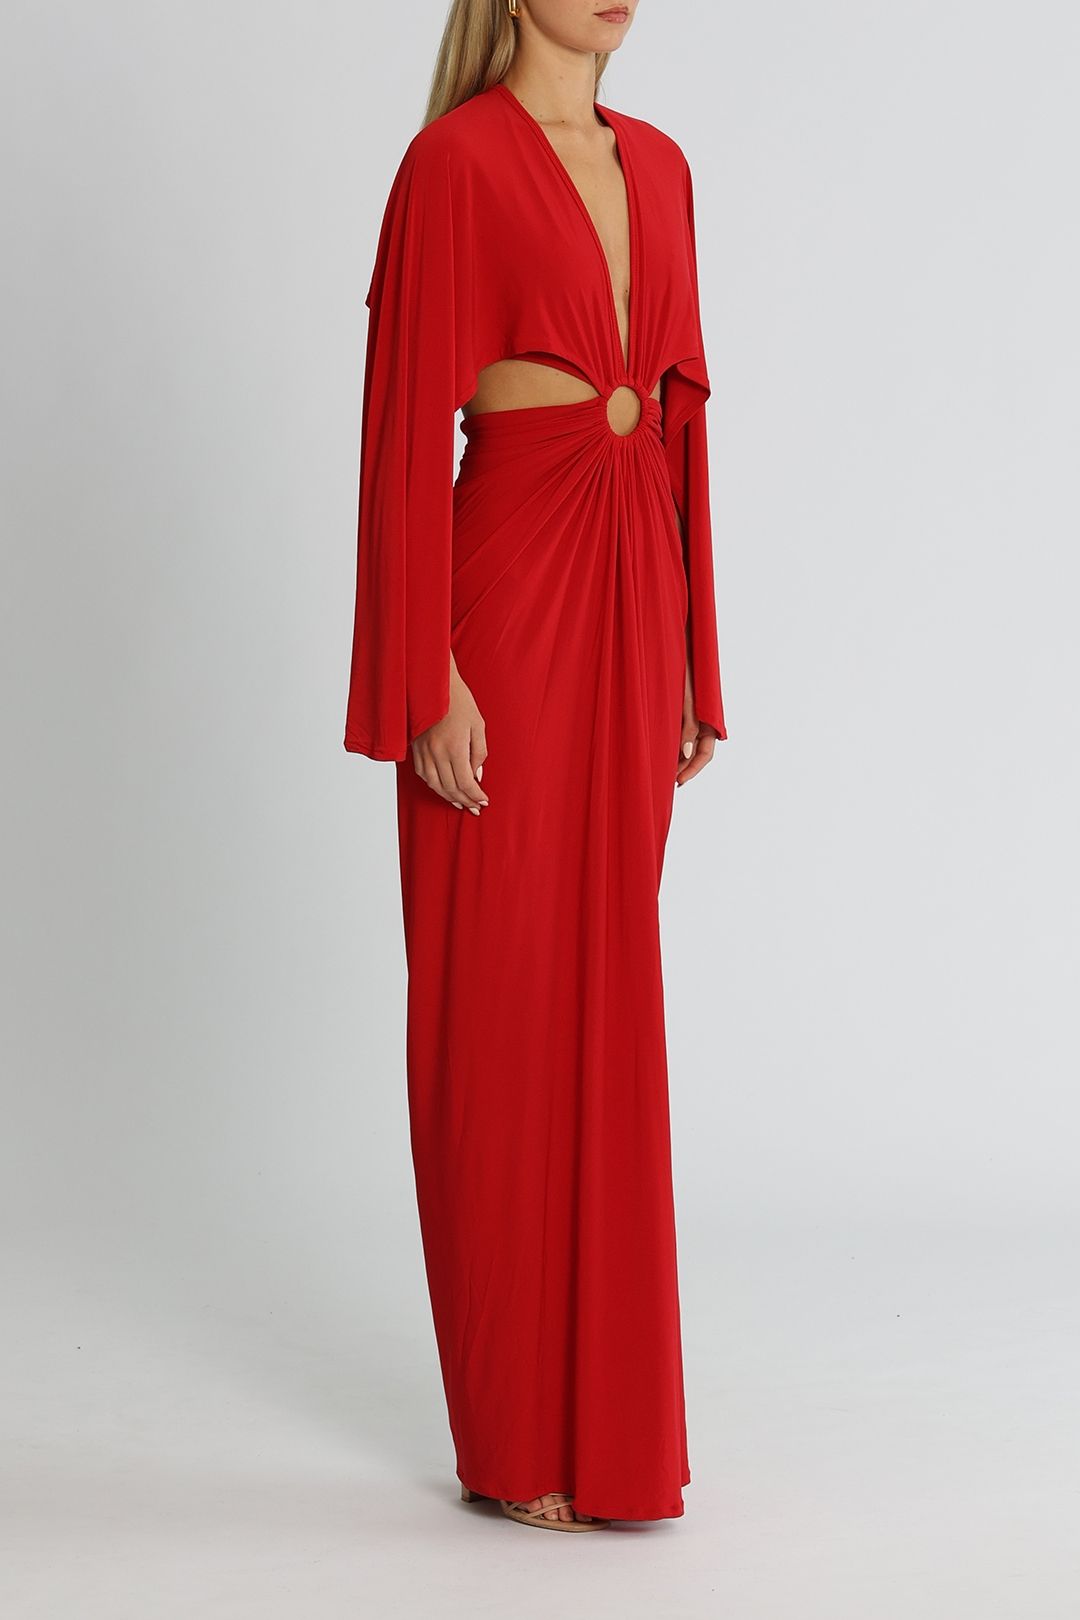 J. Angelique Selena Gown Red Cutout